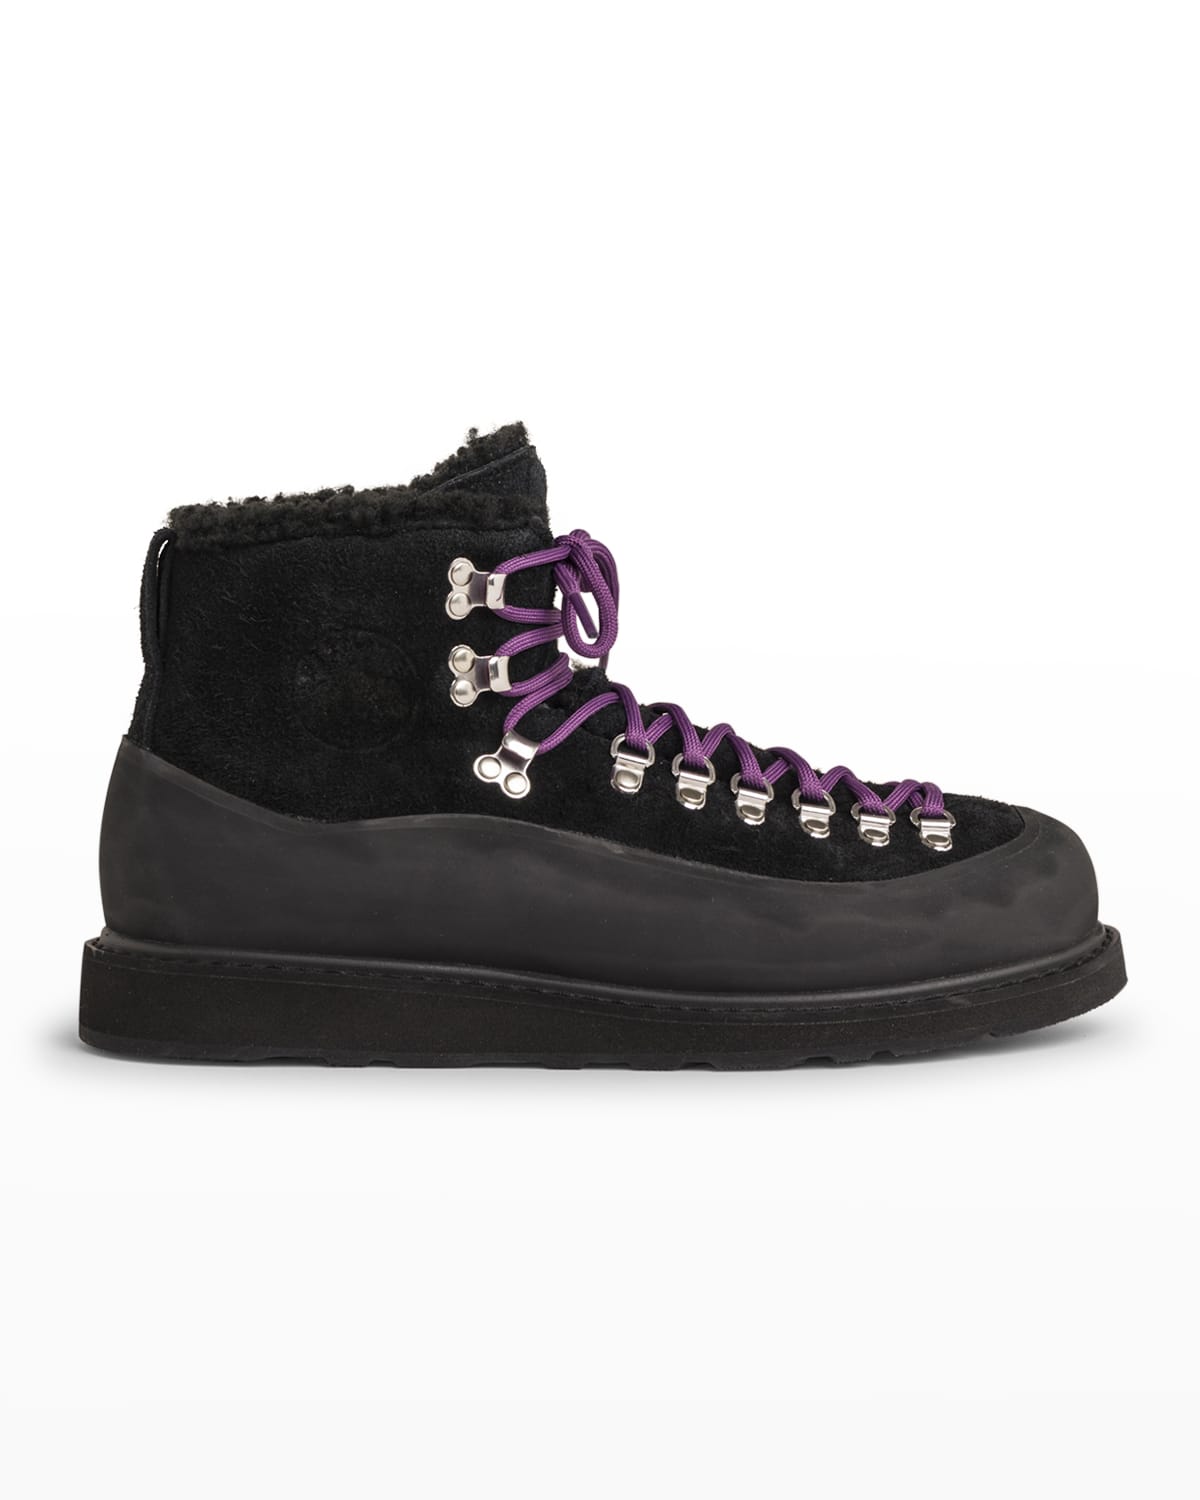 Montelliana 1965 Suede Long Hair Shearling-Lined Hiking Boots | Neiman ...